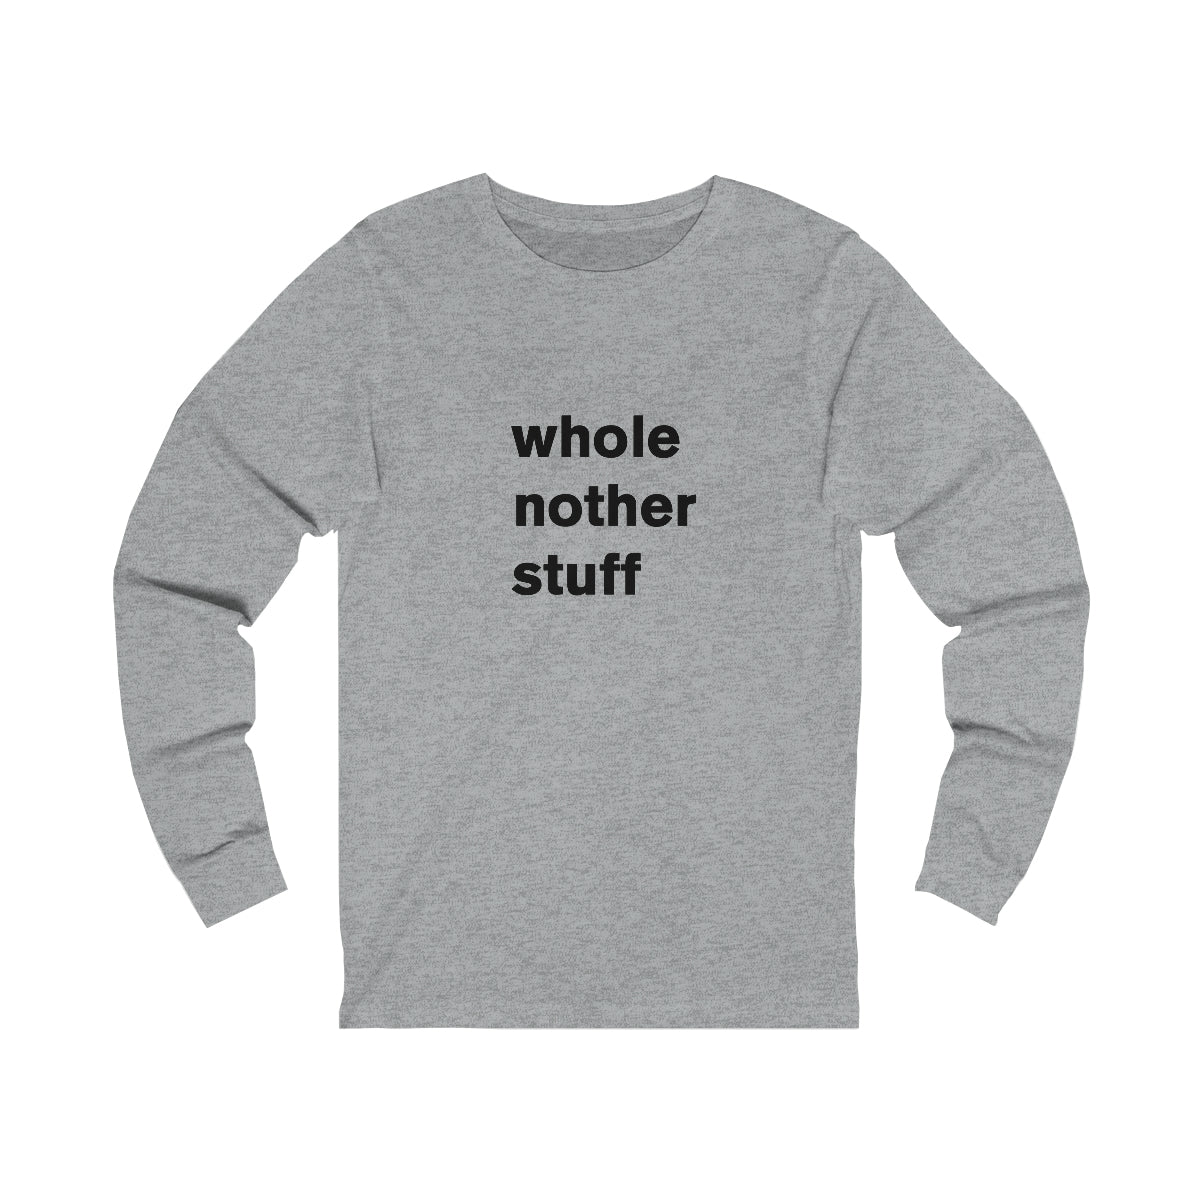 whole nother stuff - long sleeve